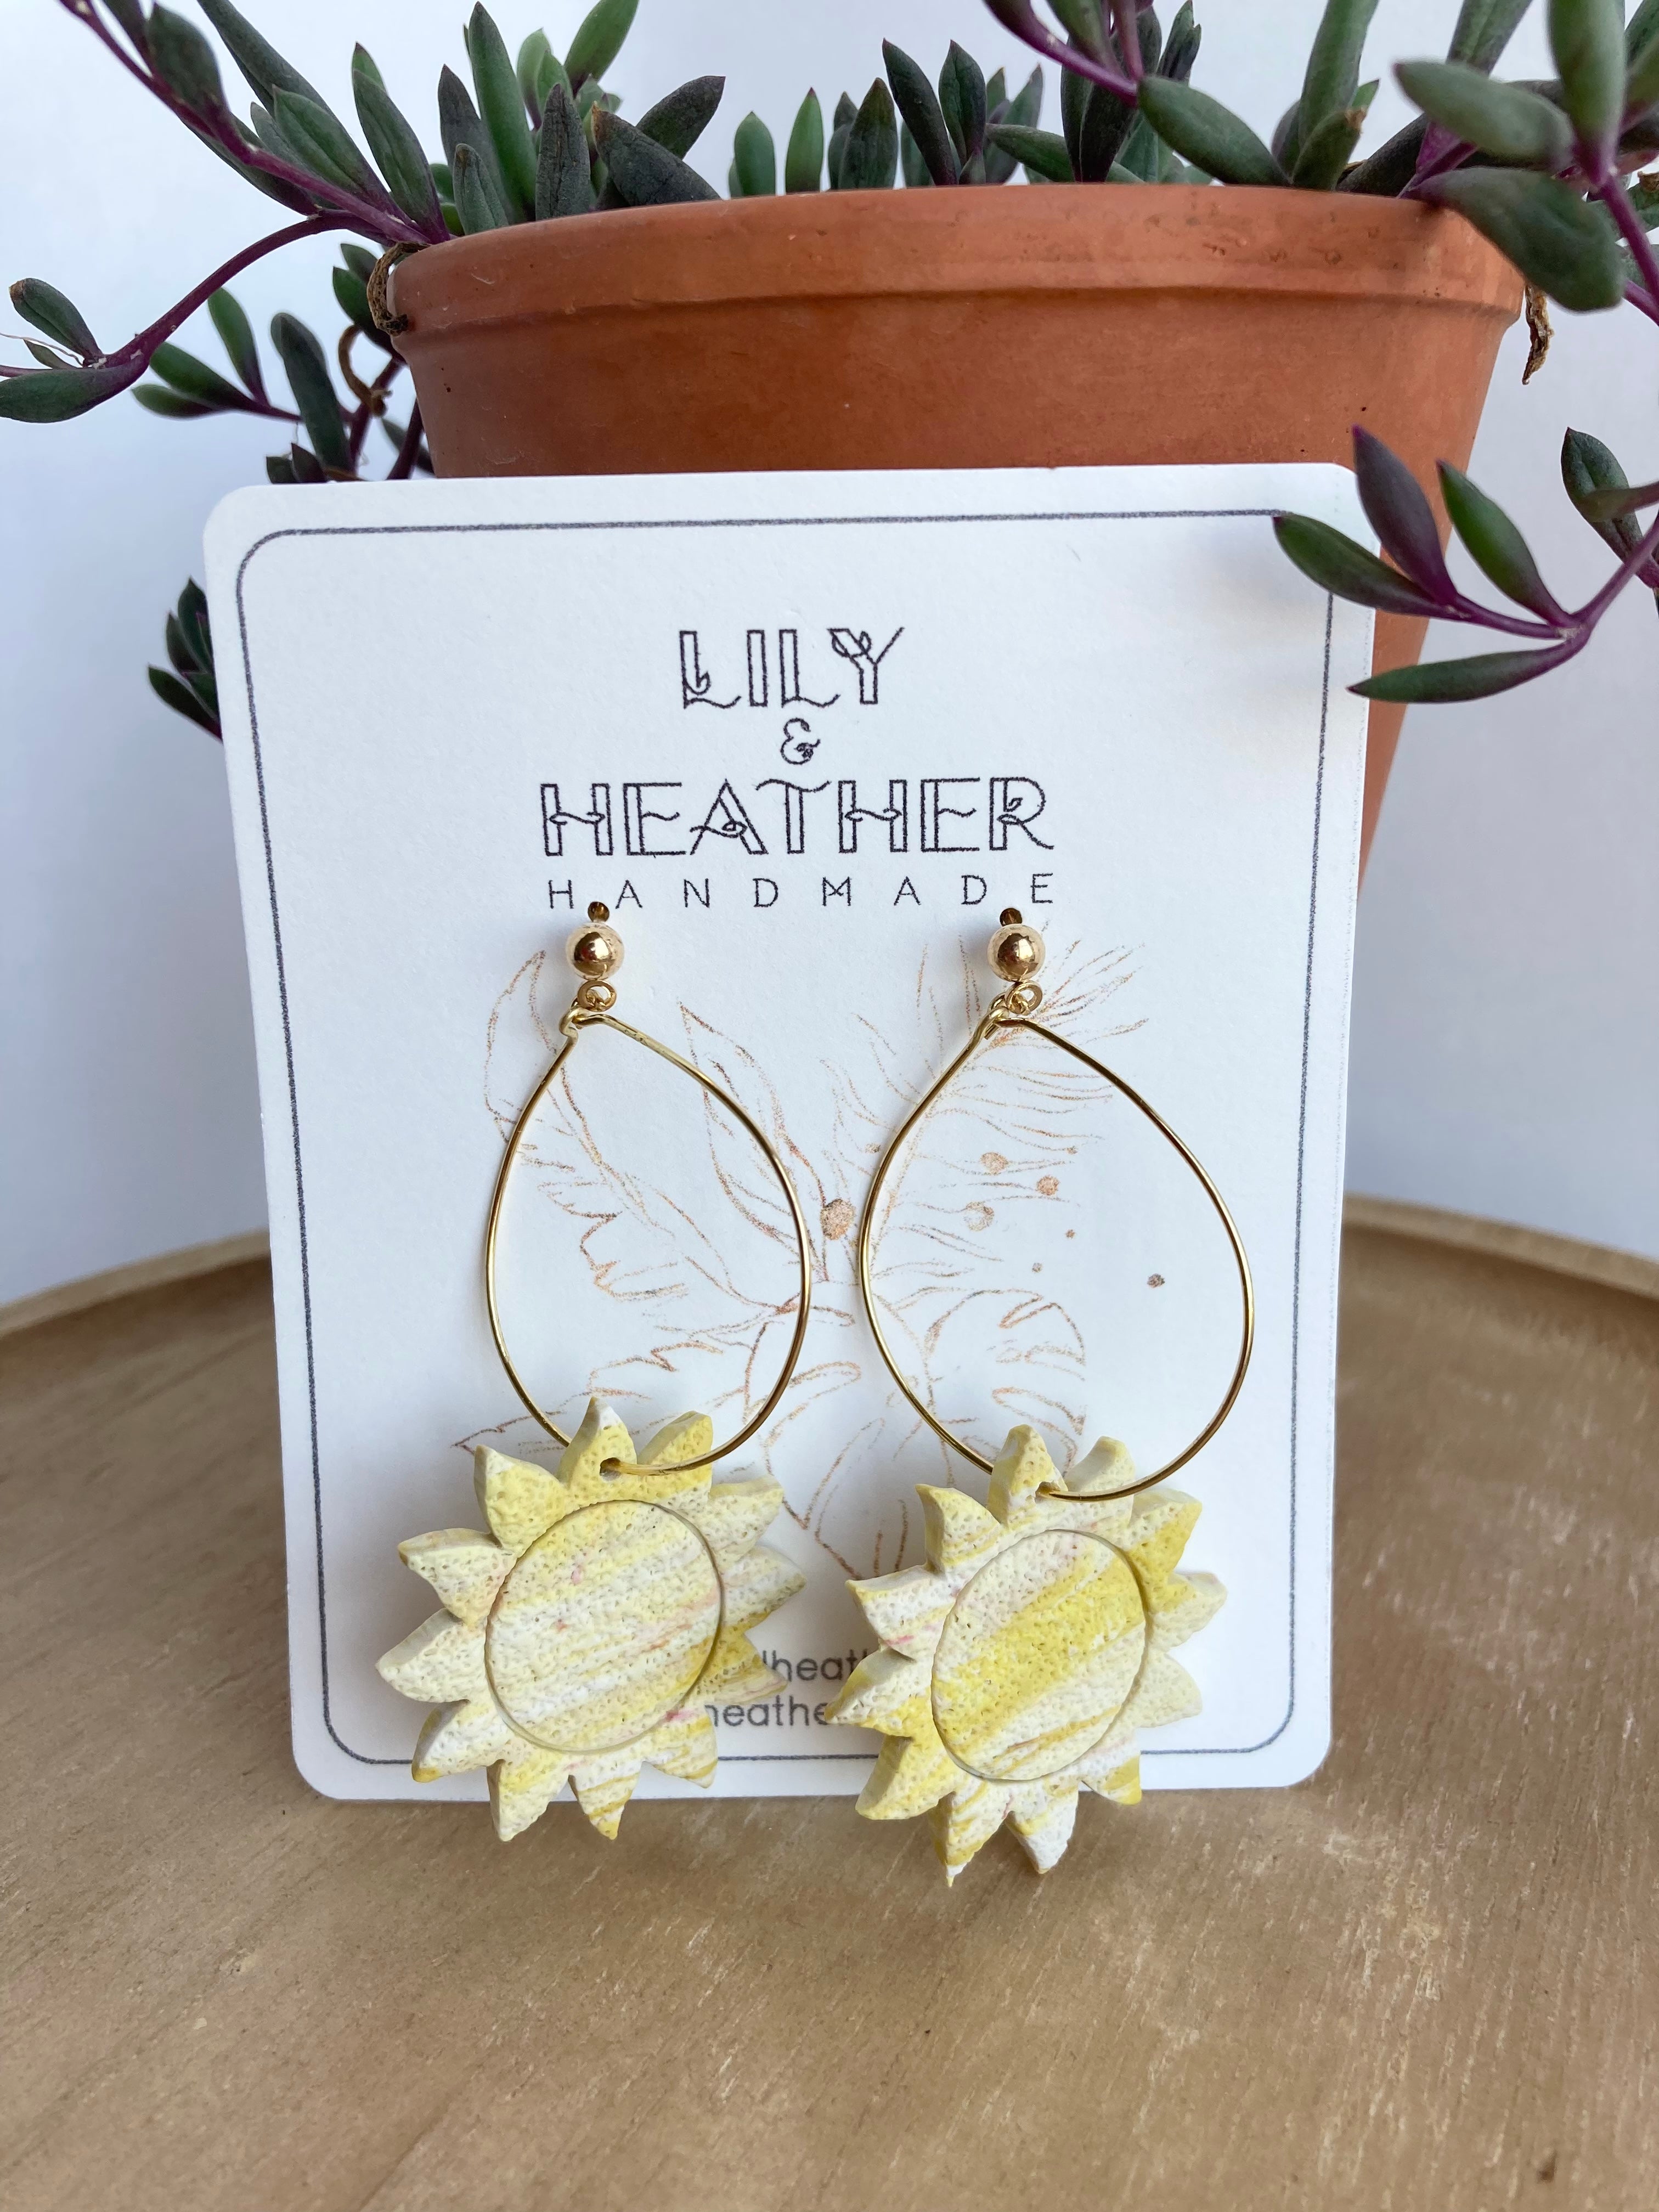 Suns with large loop - earrings from Lily & Heather Handmade